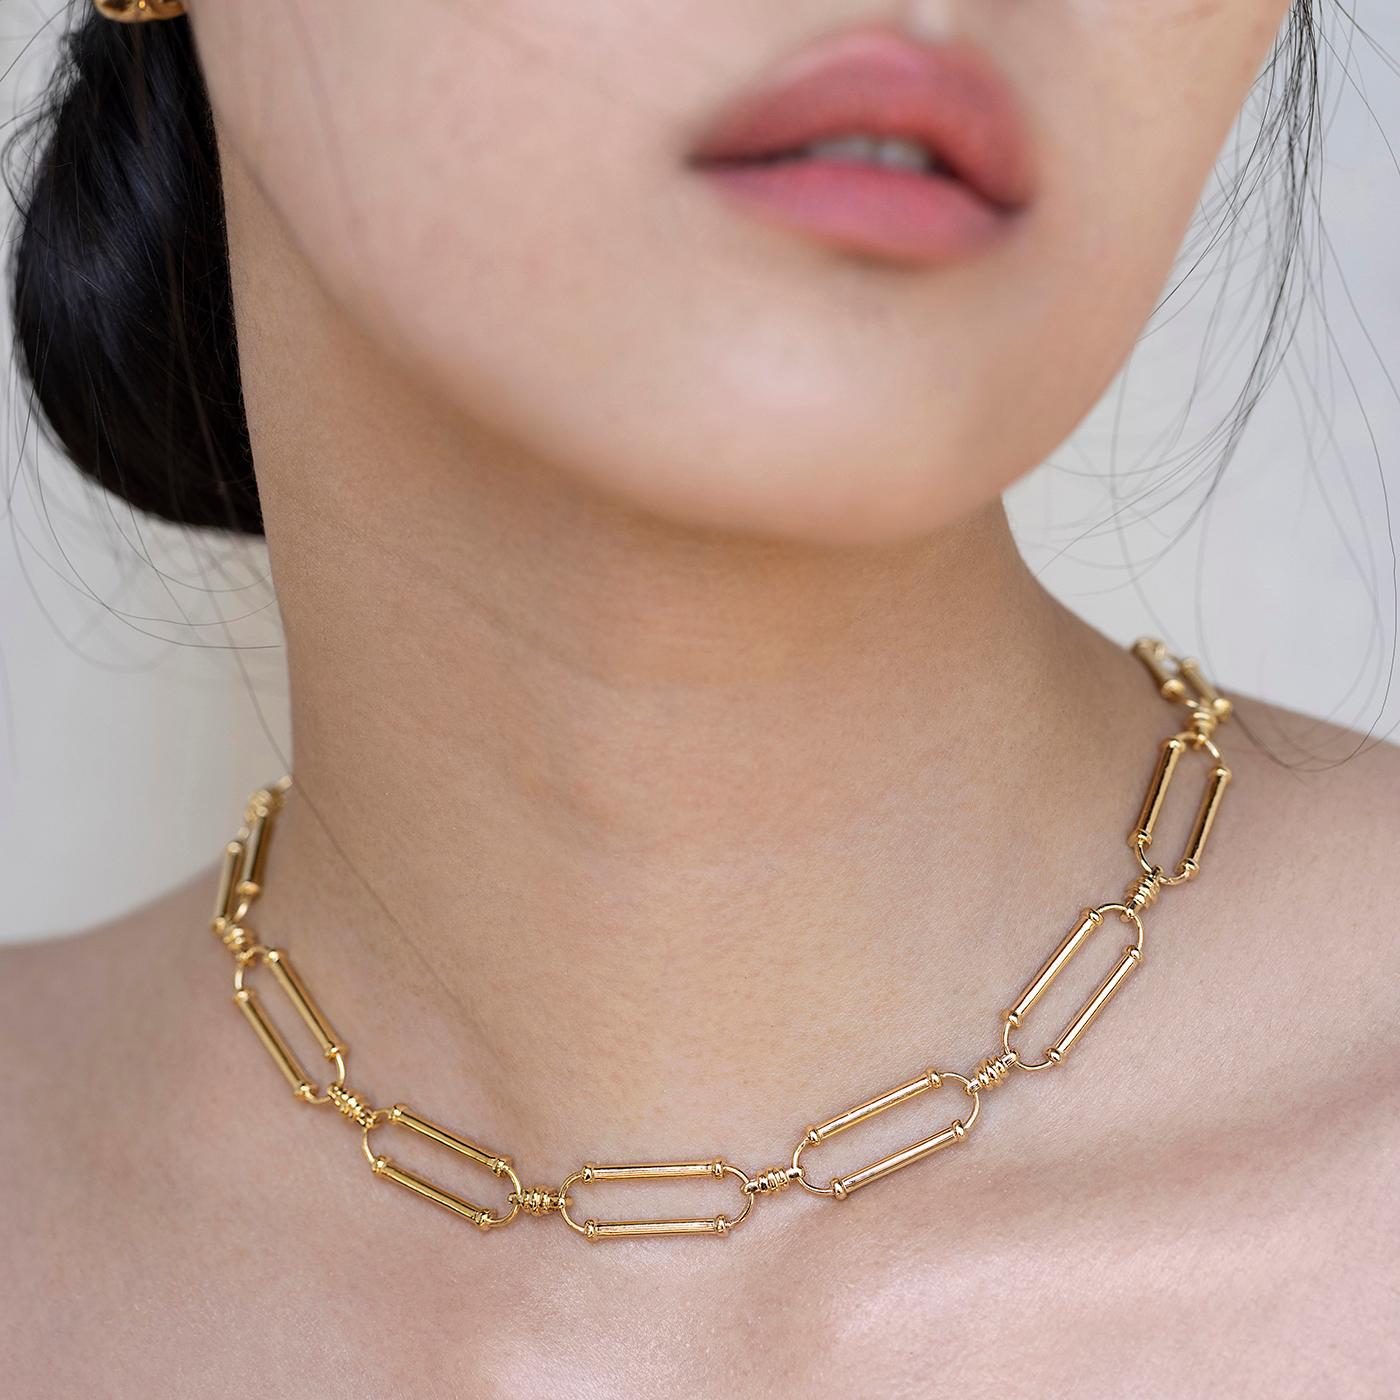 This remarkable oval link necklace was a popular style back in the Victorian era, yet translates perfectly for today’s modern jewelry wearer. Handcrafted link-by-link in our NYC workshop with 18kt Fairmined Ecological gold. A timeless piece for